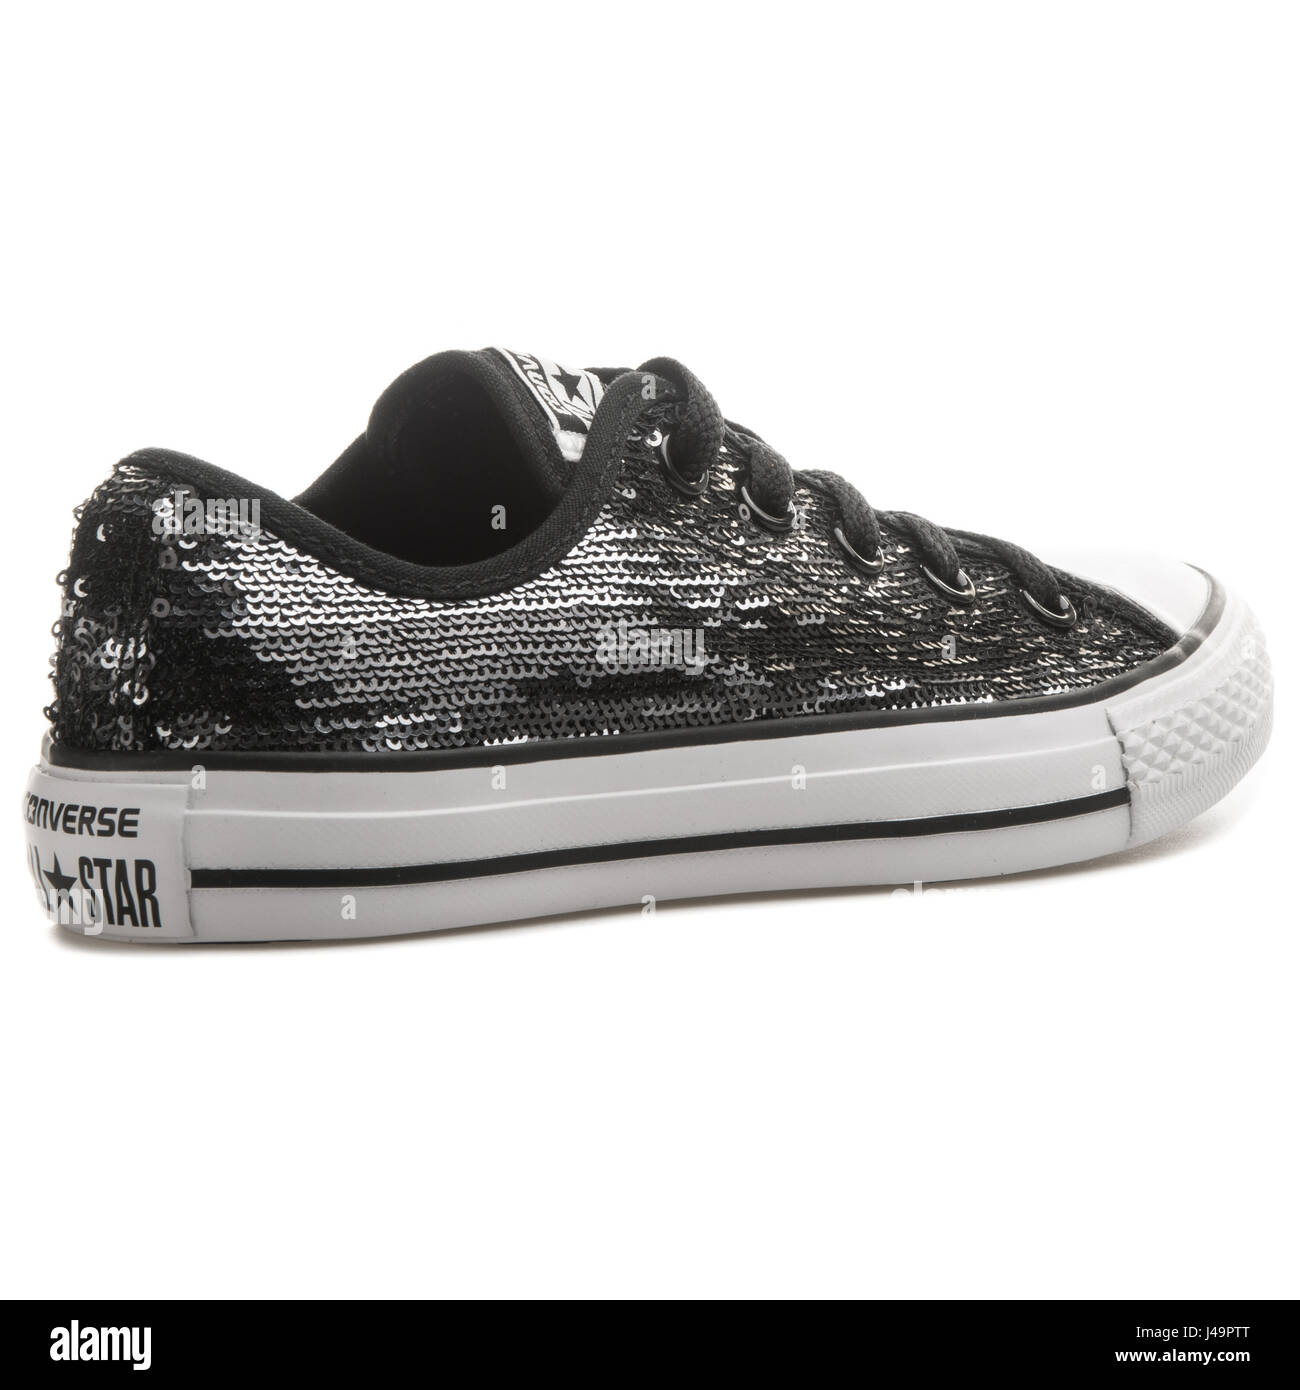 Converse Chuck Taylor All Star CT Sequin OX Black - 549665C Stock Photo -  Alamy